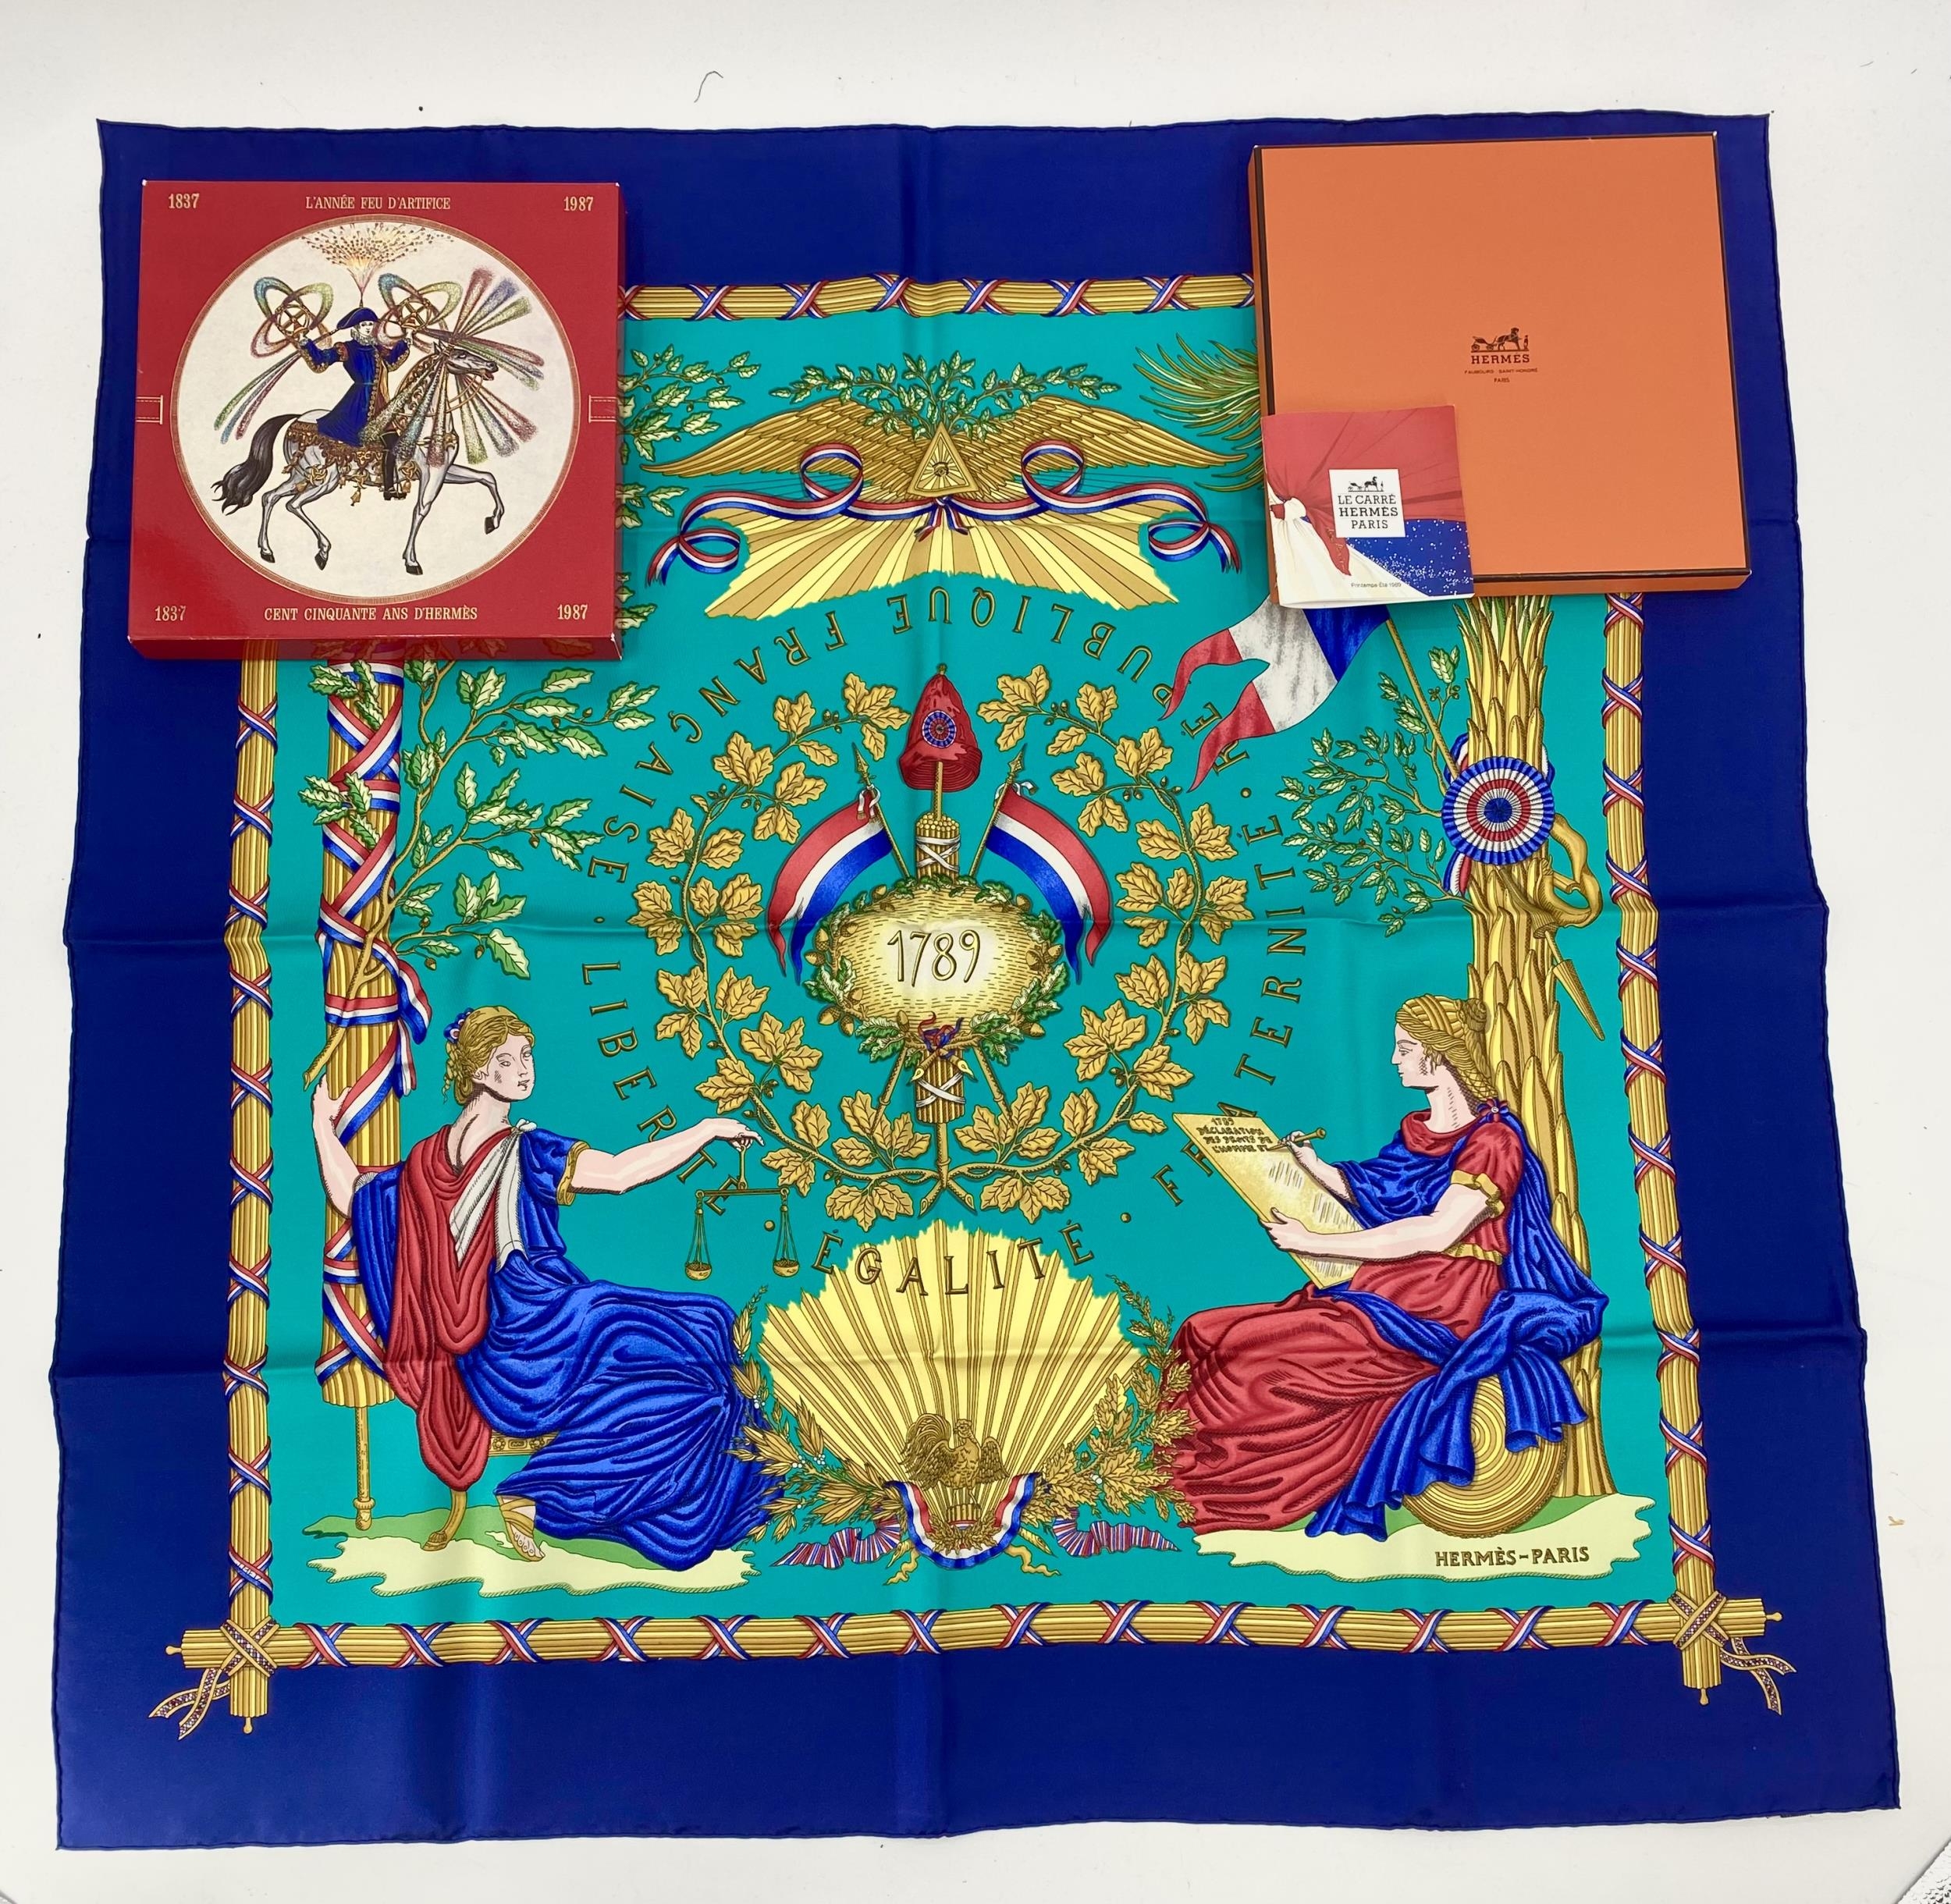 HERMES scarf, in original orange box, and pamphlet and tissue. "1789", to commemorate the 200th